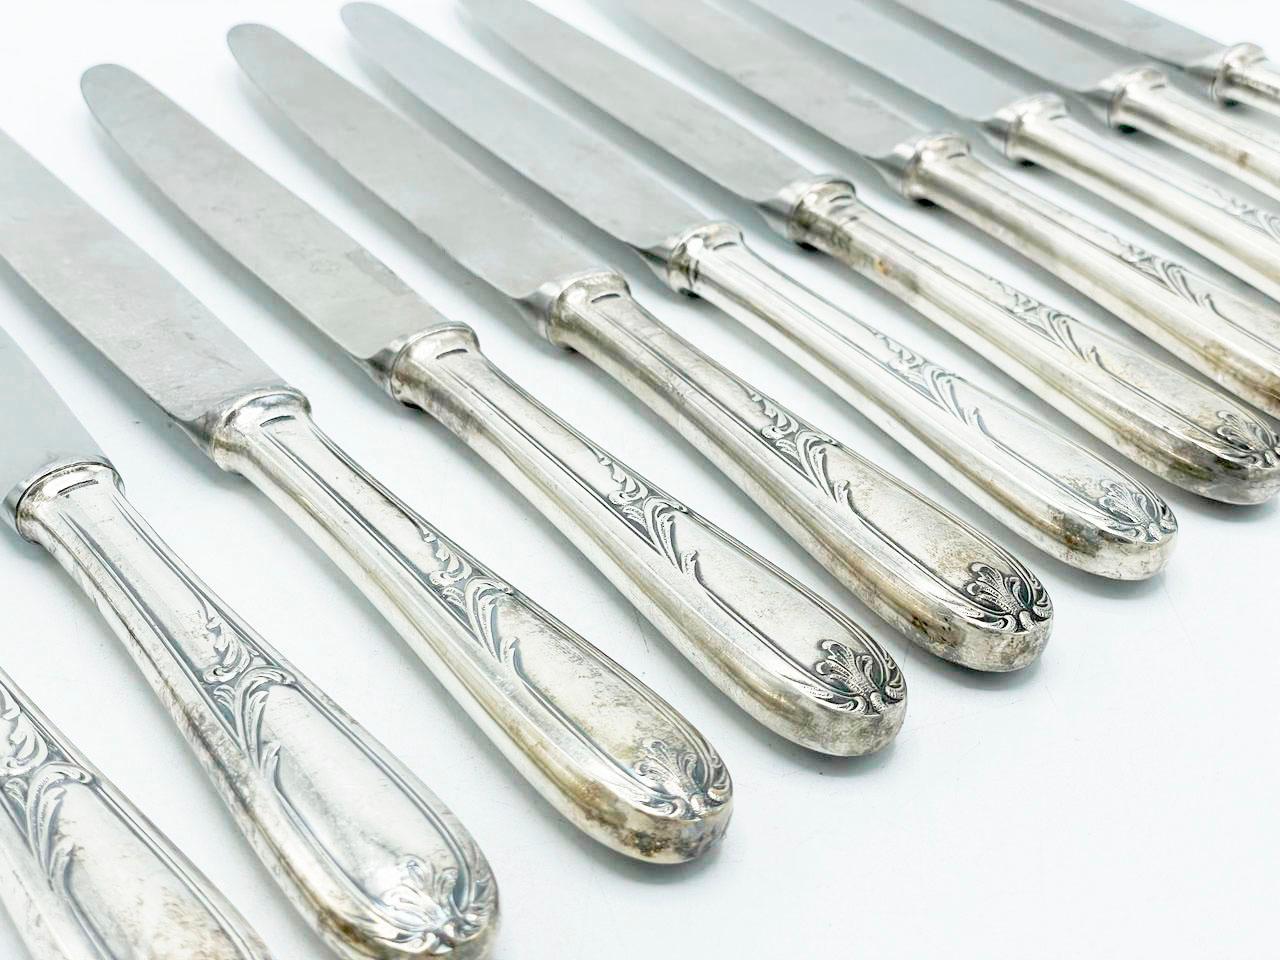 Christofle Made in Argentina, Flatware art nouveau in Silverplated For Sale 4